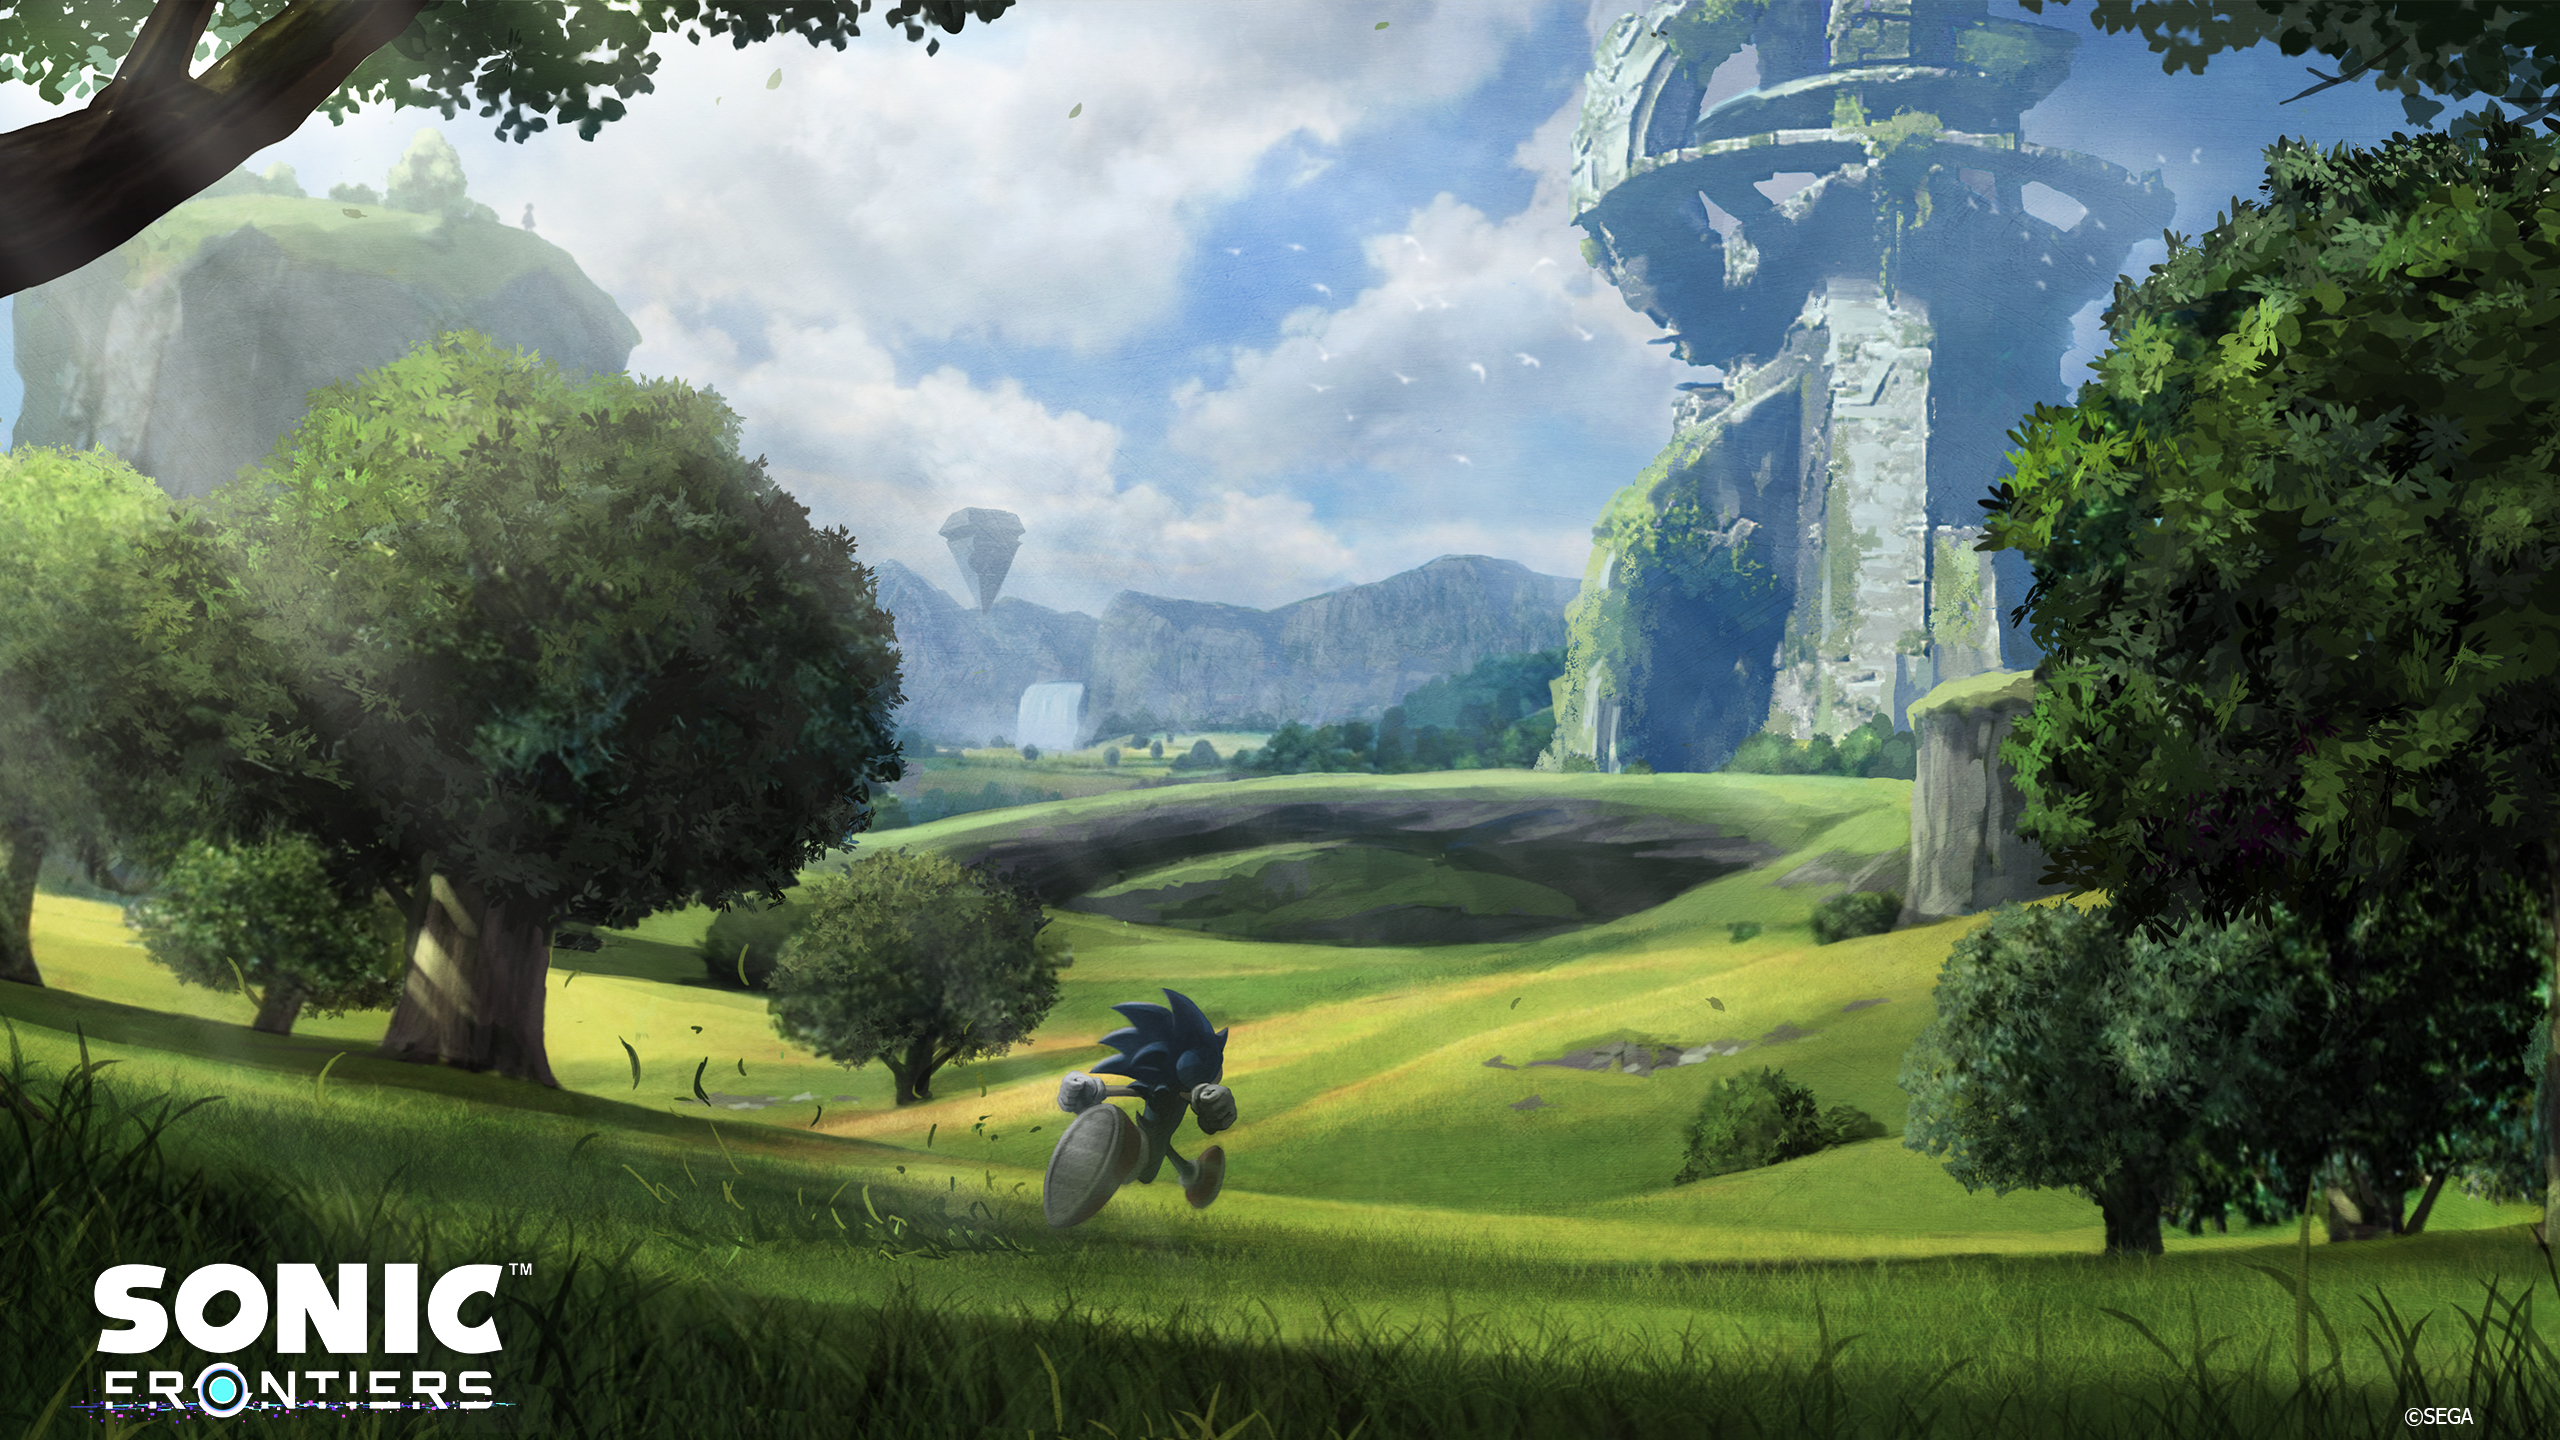 HD wallpaper featuring Sonic Frontiers with Sonic the Hedgehog in a lush green landscape for desktop background.